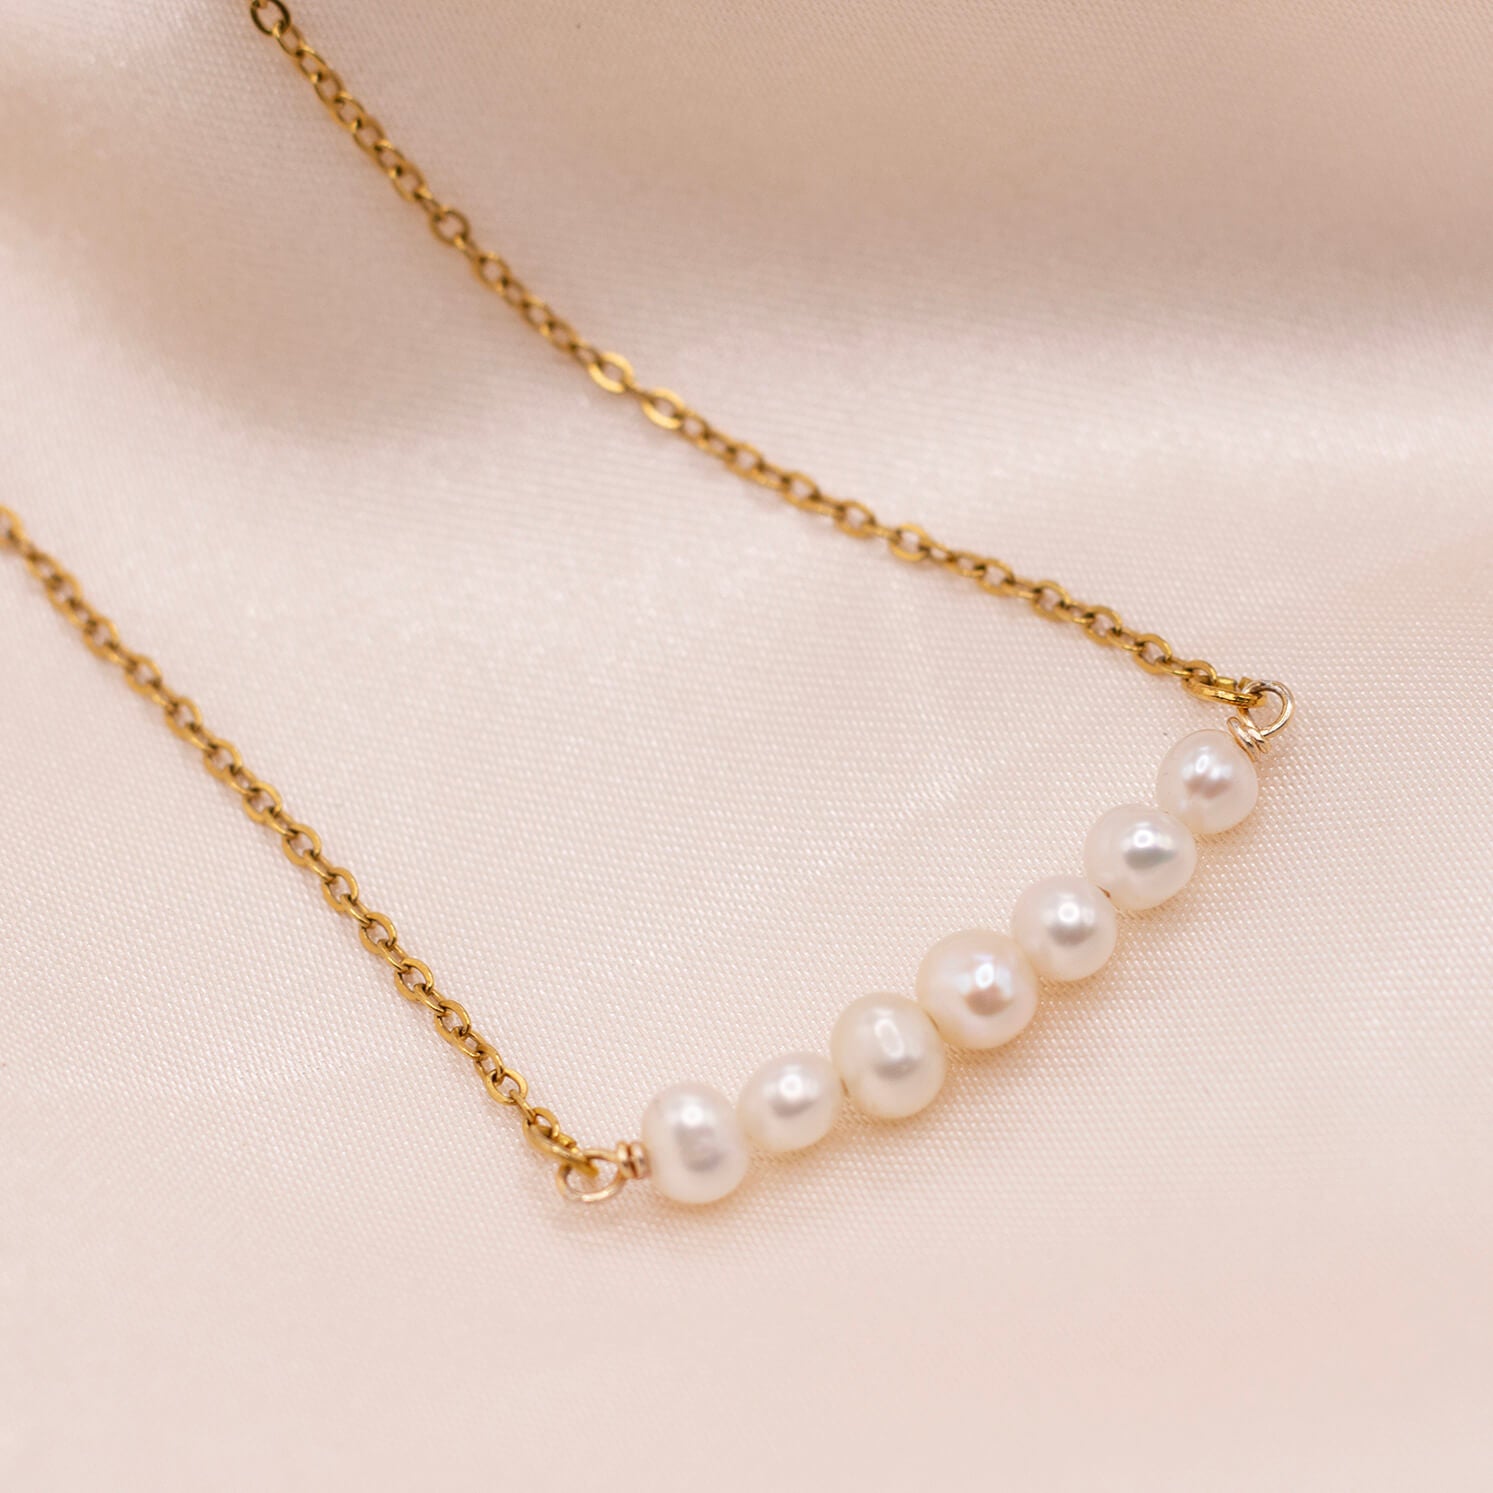 Minimalist pearl bar necklace with dainty freshwater pearls and gold-plated stainless steel chain. Waterproof and hypoallergenic.